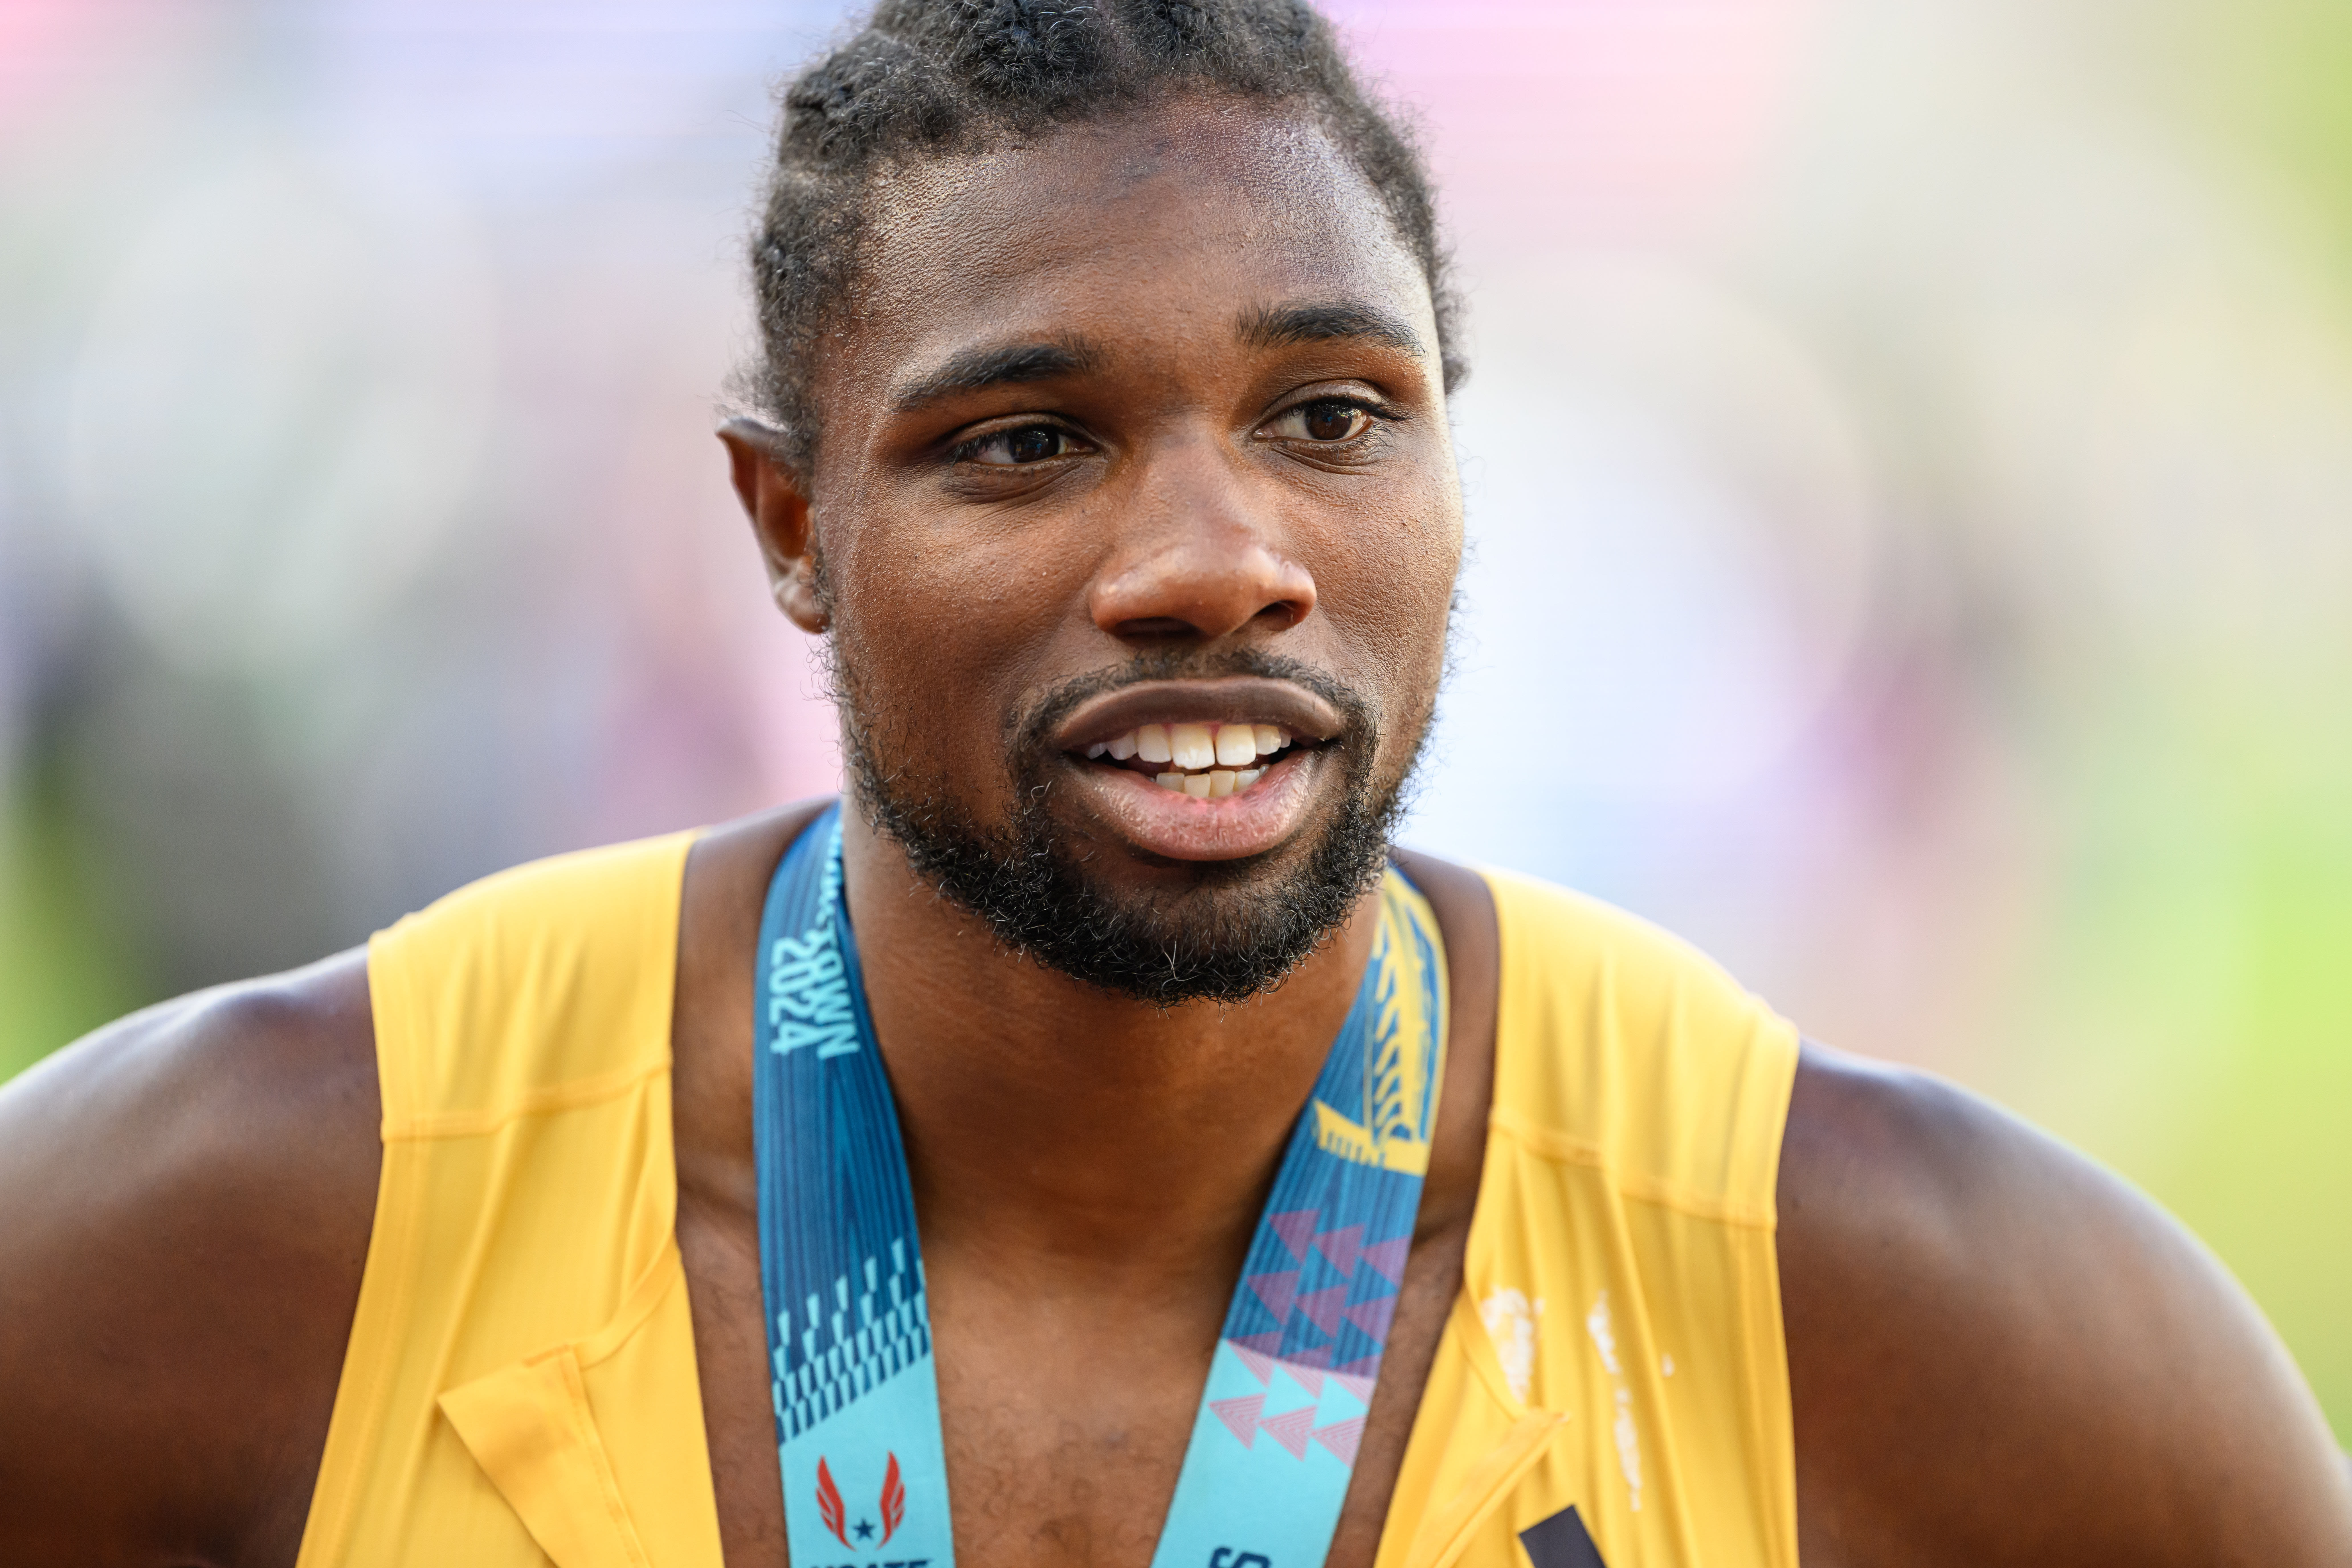 U.S. Track & Field Trials: Noah Lyles takes another step toward goal of four Olympic golds